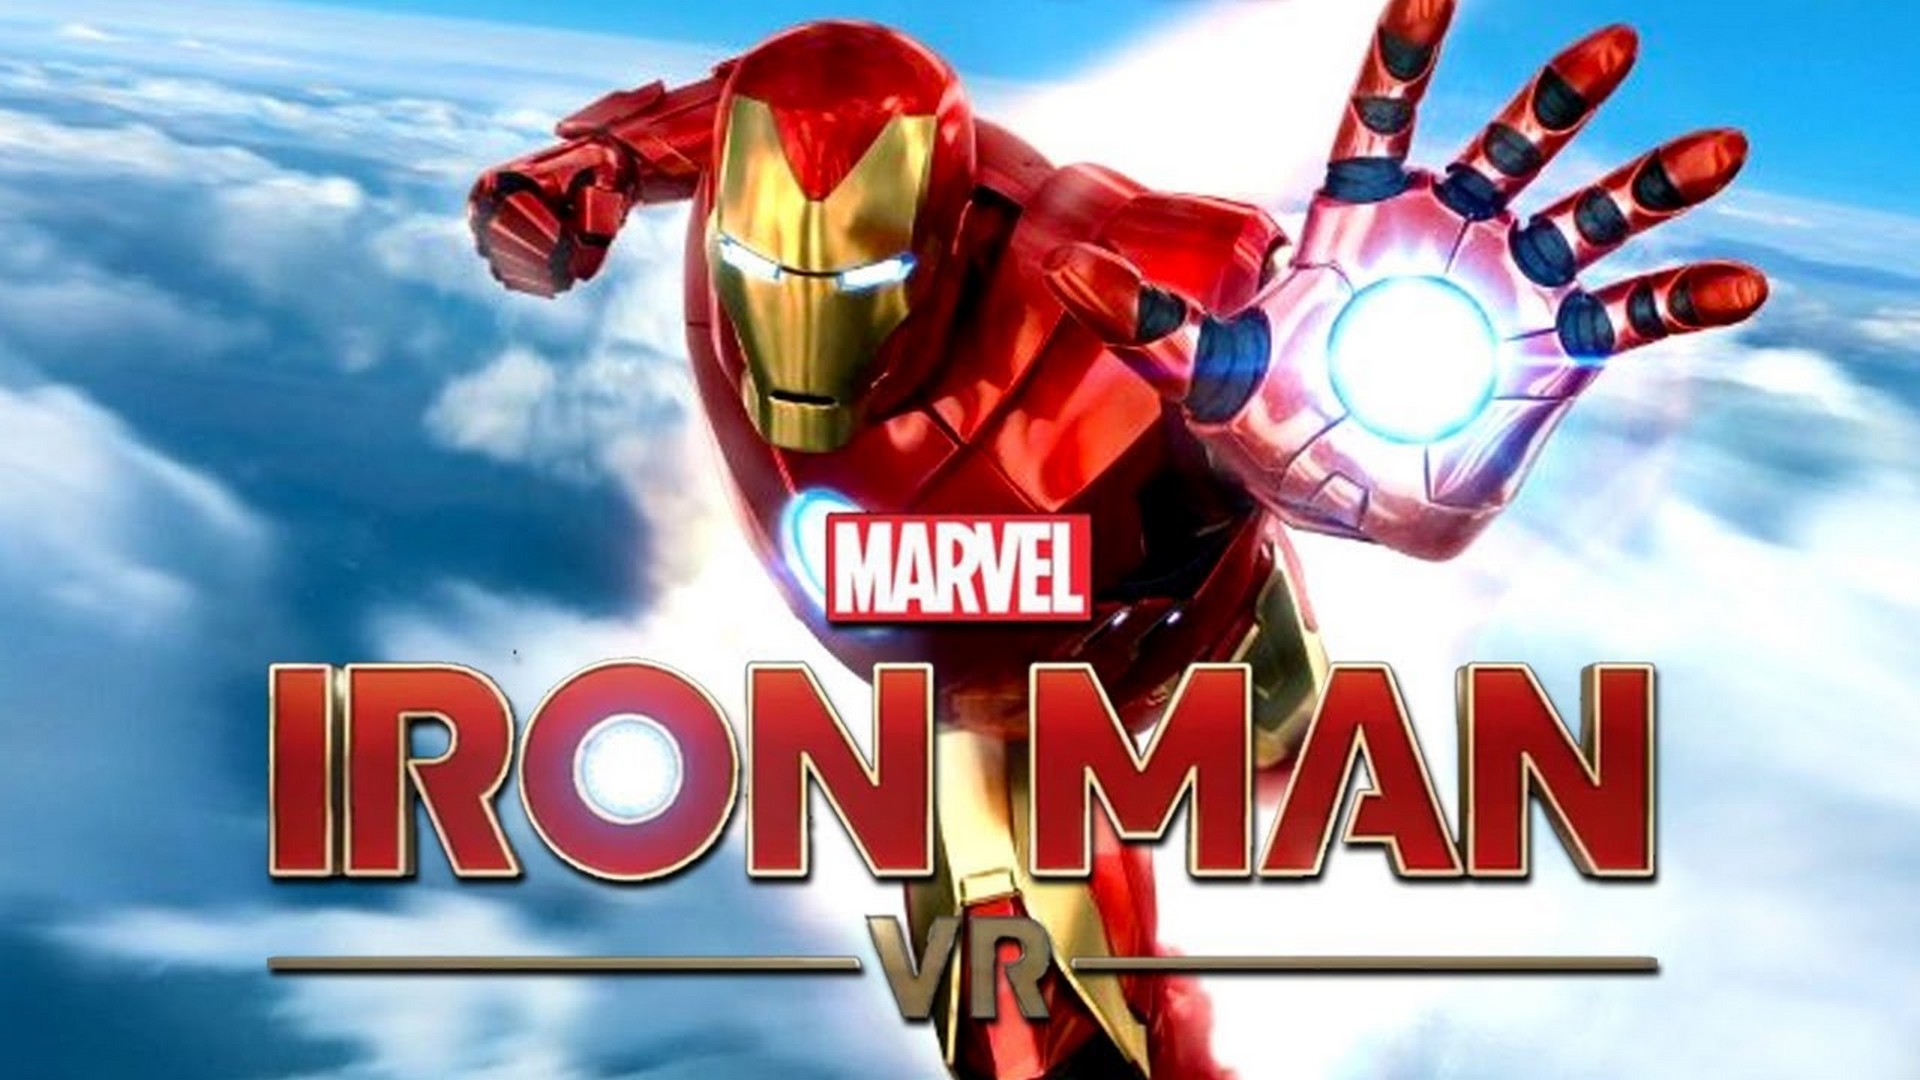 iron man vr ps4 store